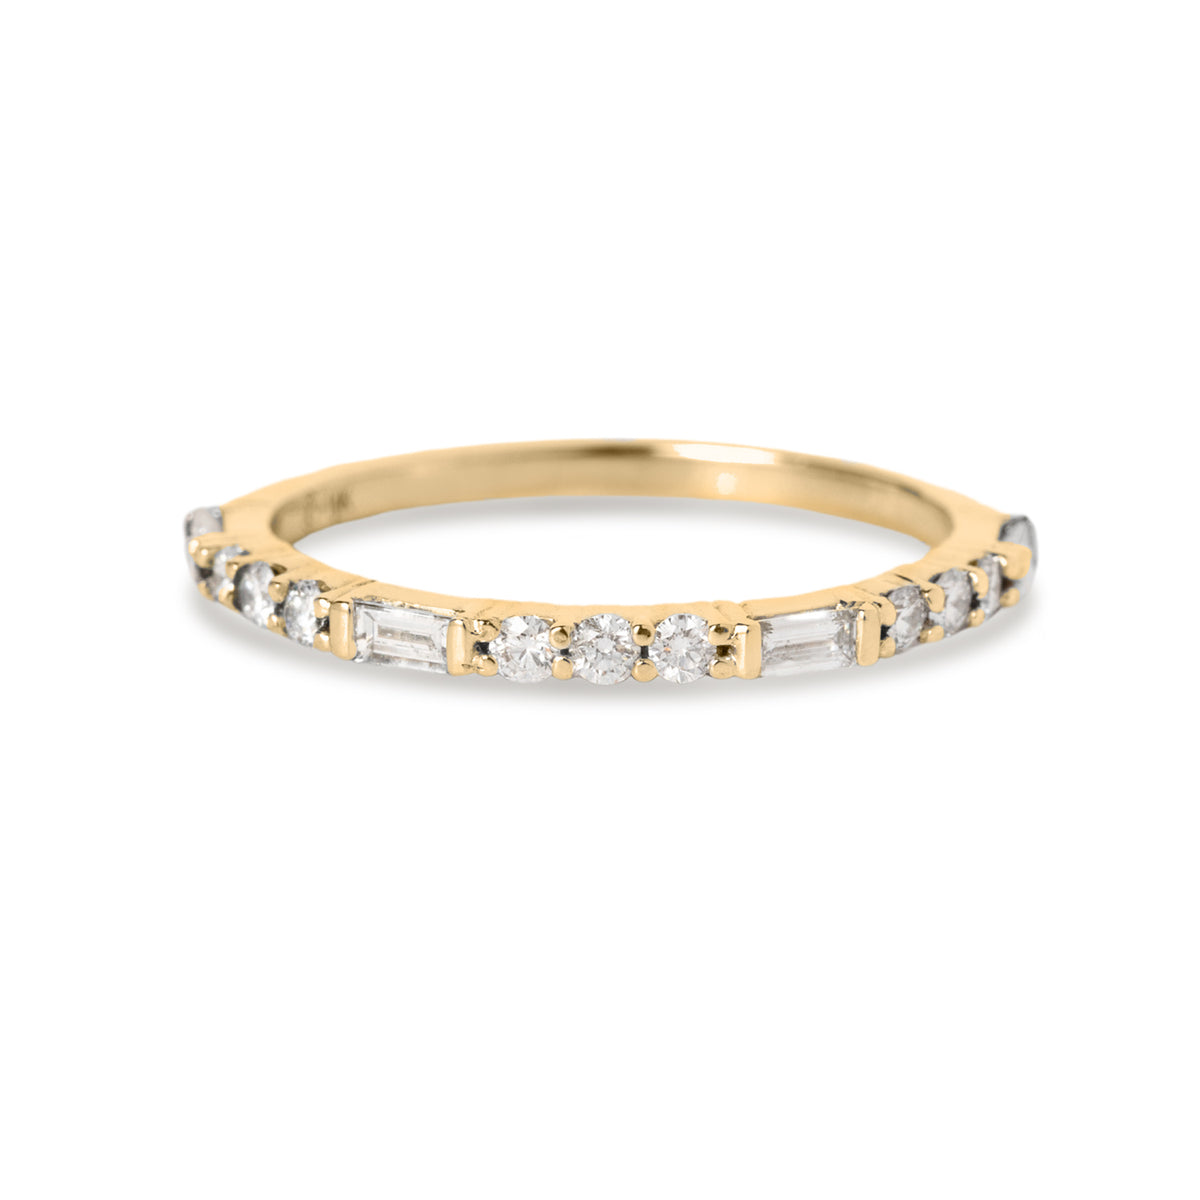 14k yellow, white, or rose gold round and baguette diamond wedding ring natural or lab grown diamonds